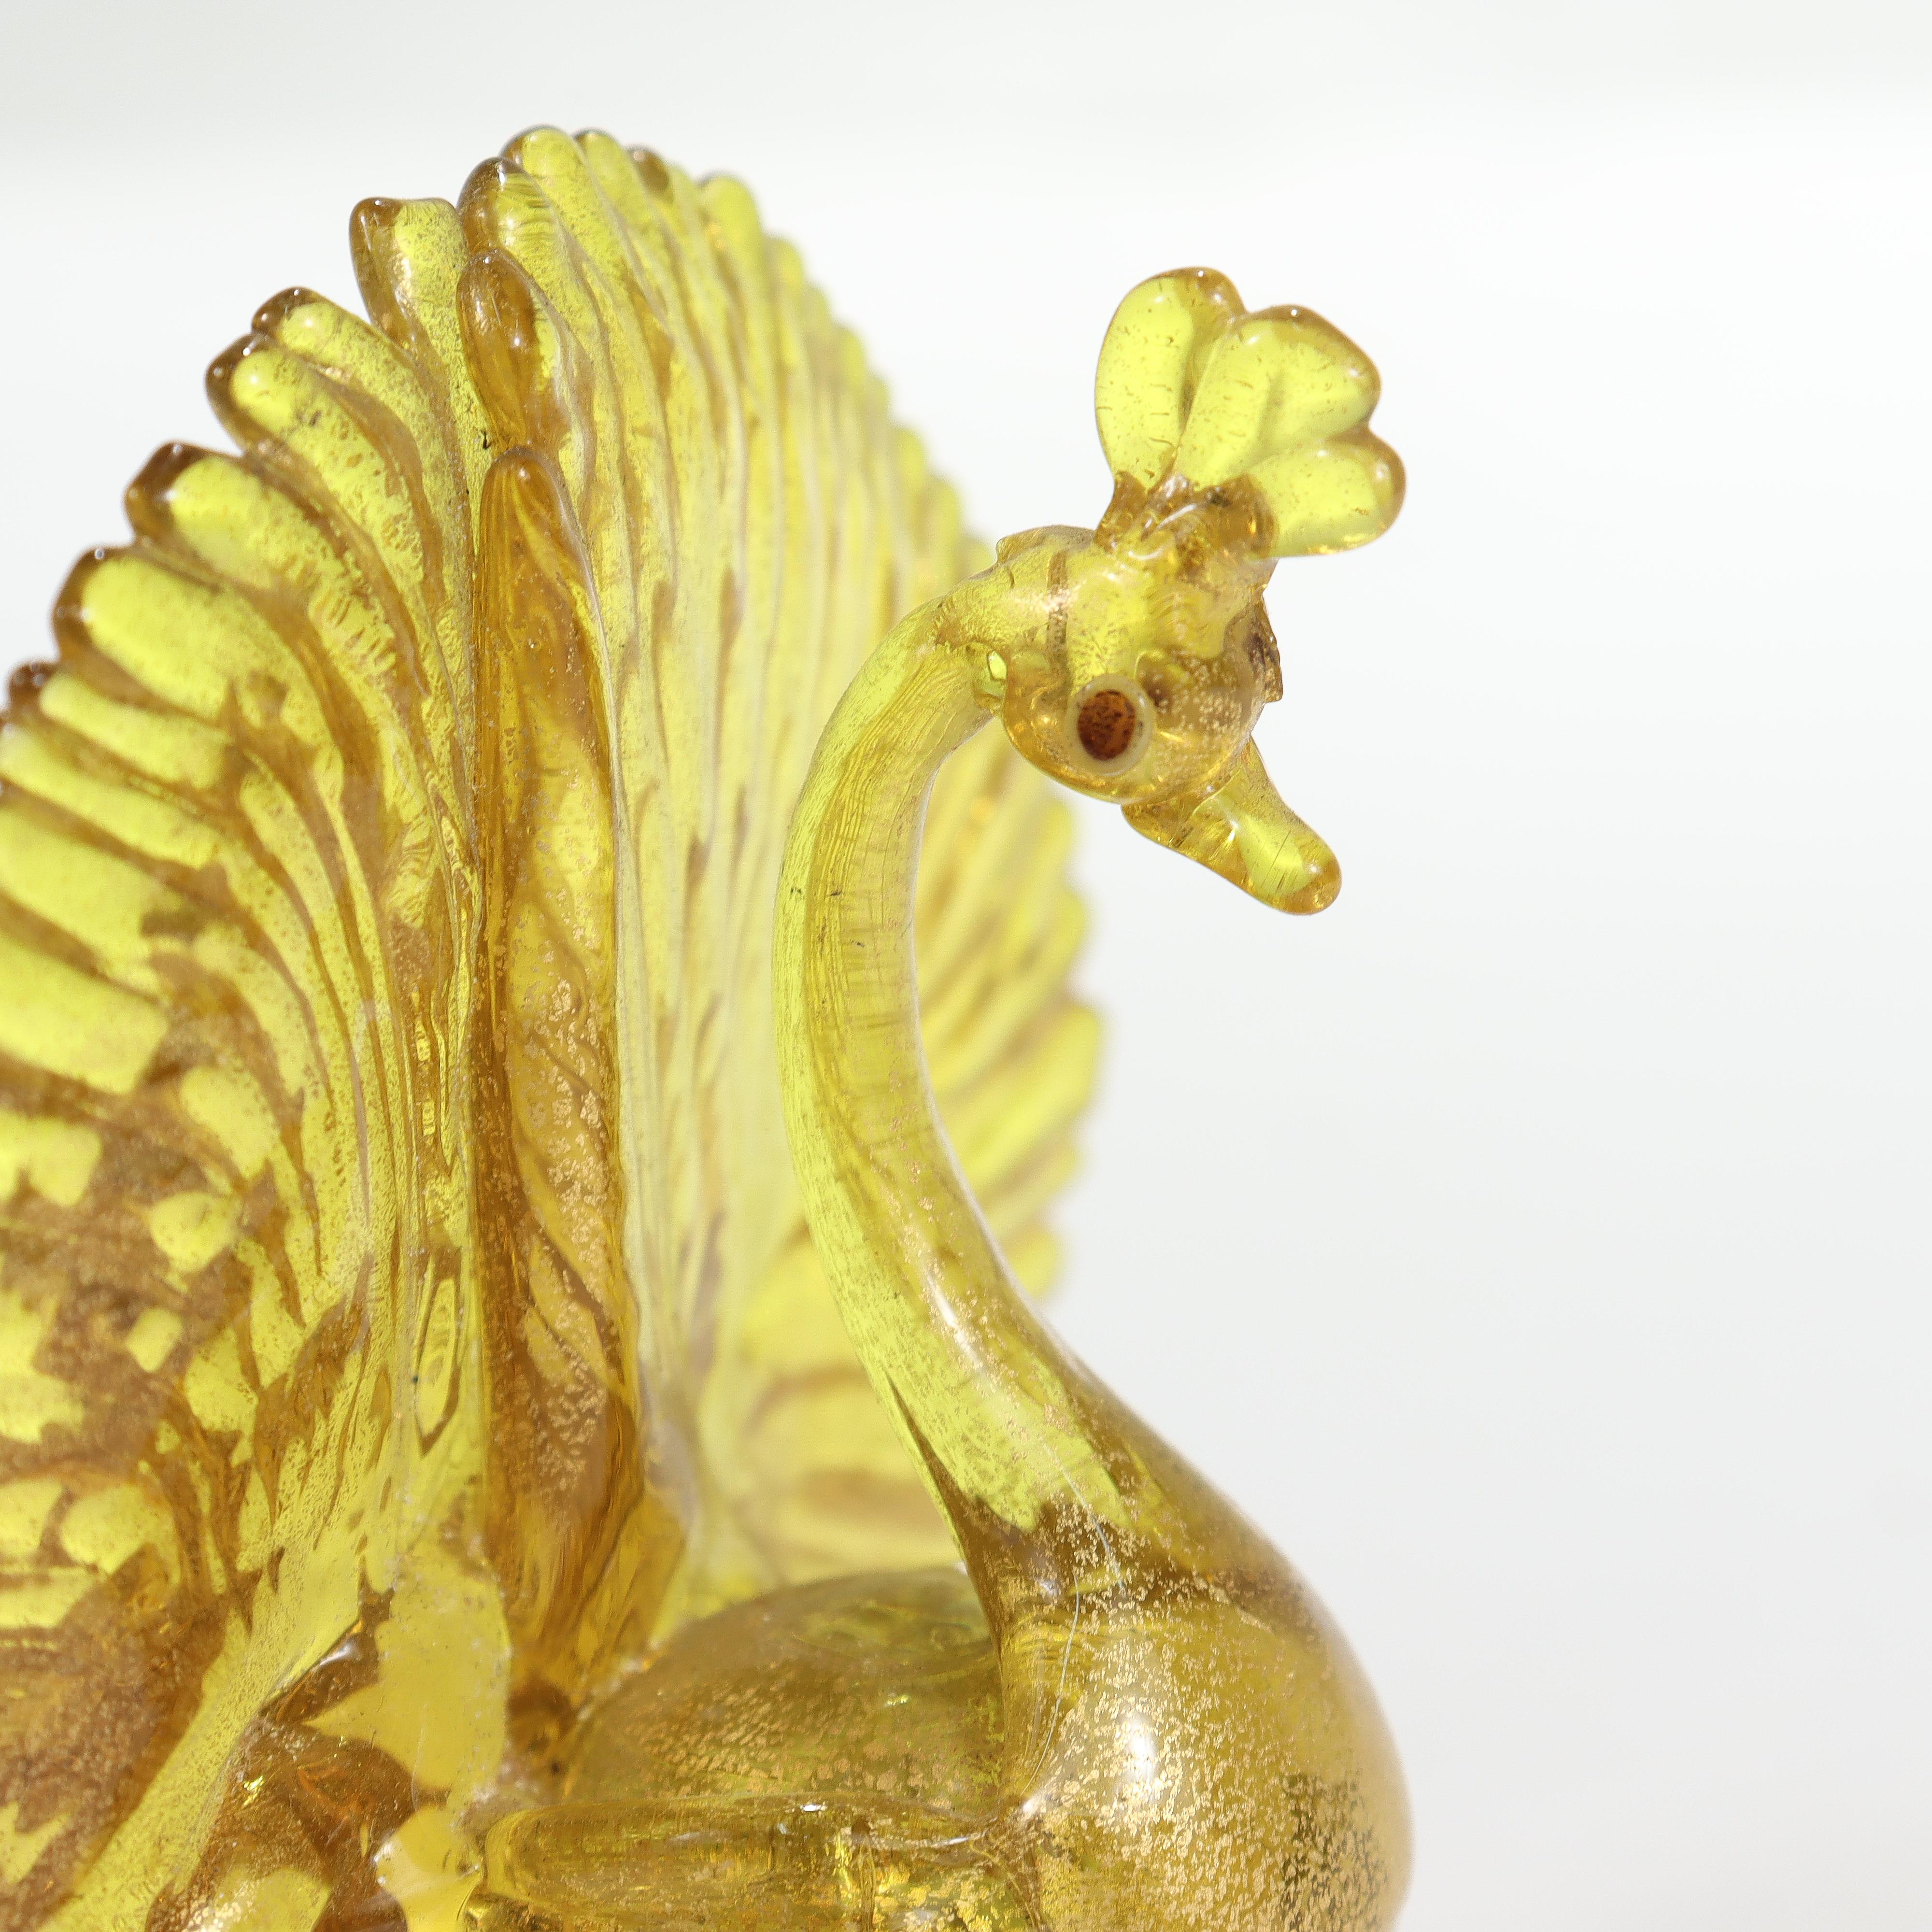 20th Century Salviati Attributed Venetian/Murano Glass Peacock Place Card Holder or Figurine For Sale